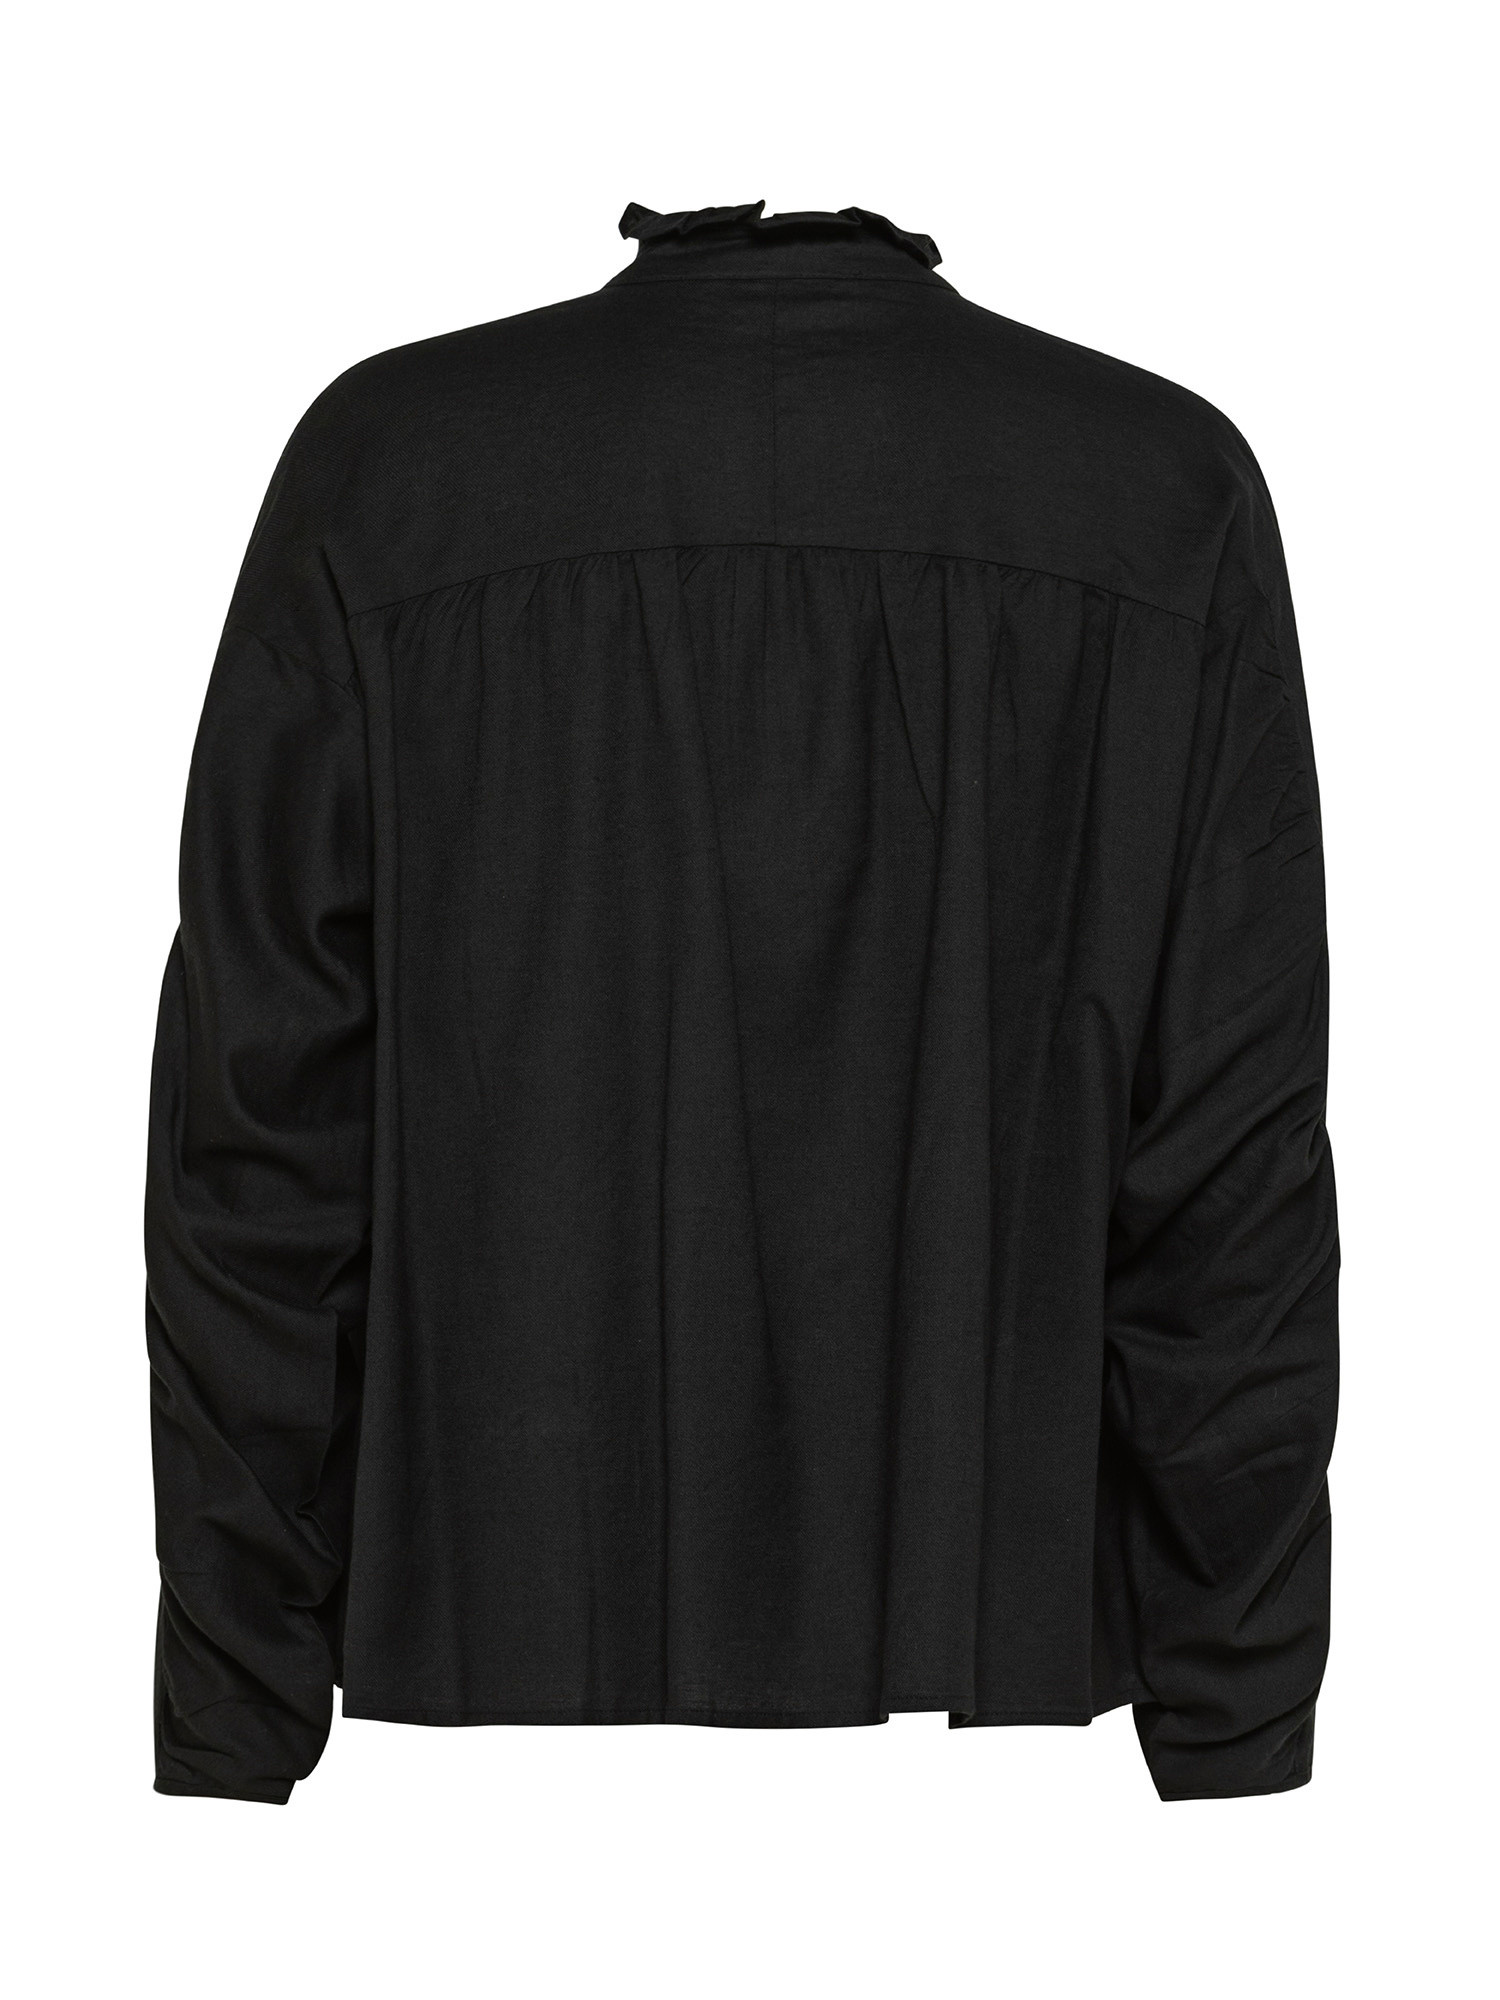 Blouse in cotton with long sleeves, Black, large image number 1